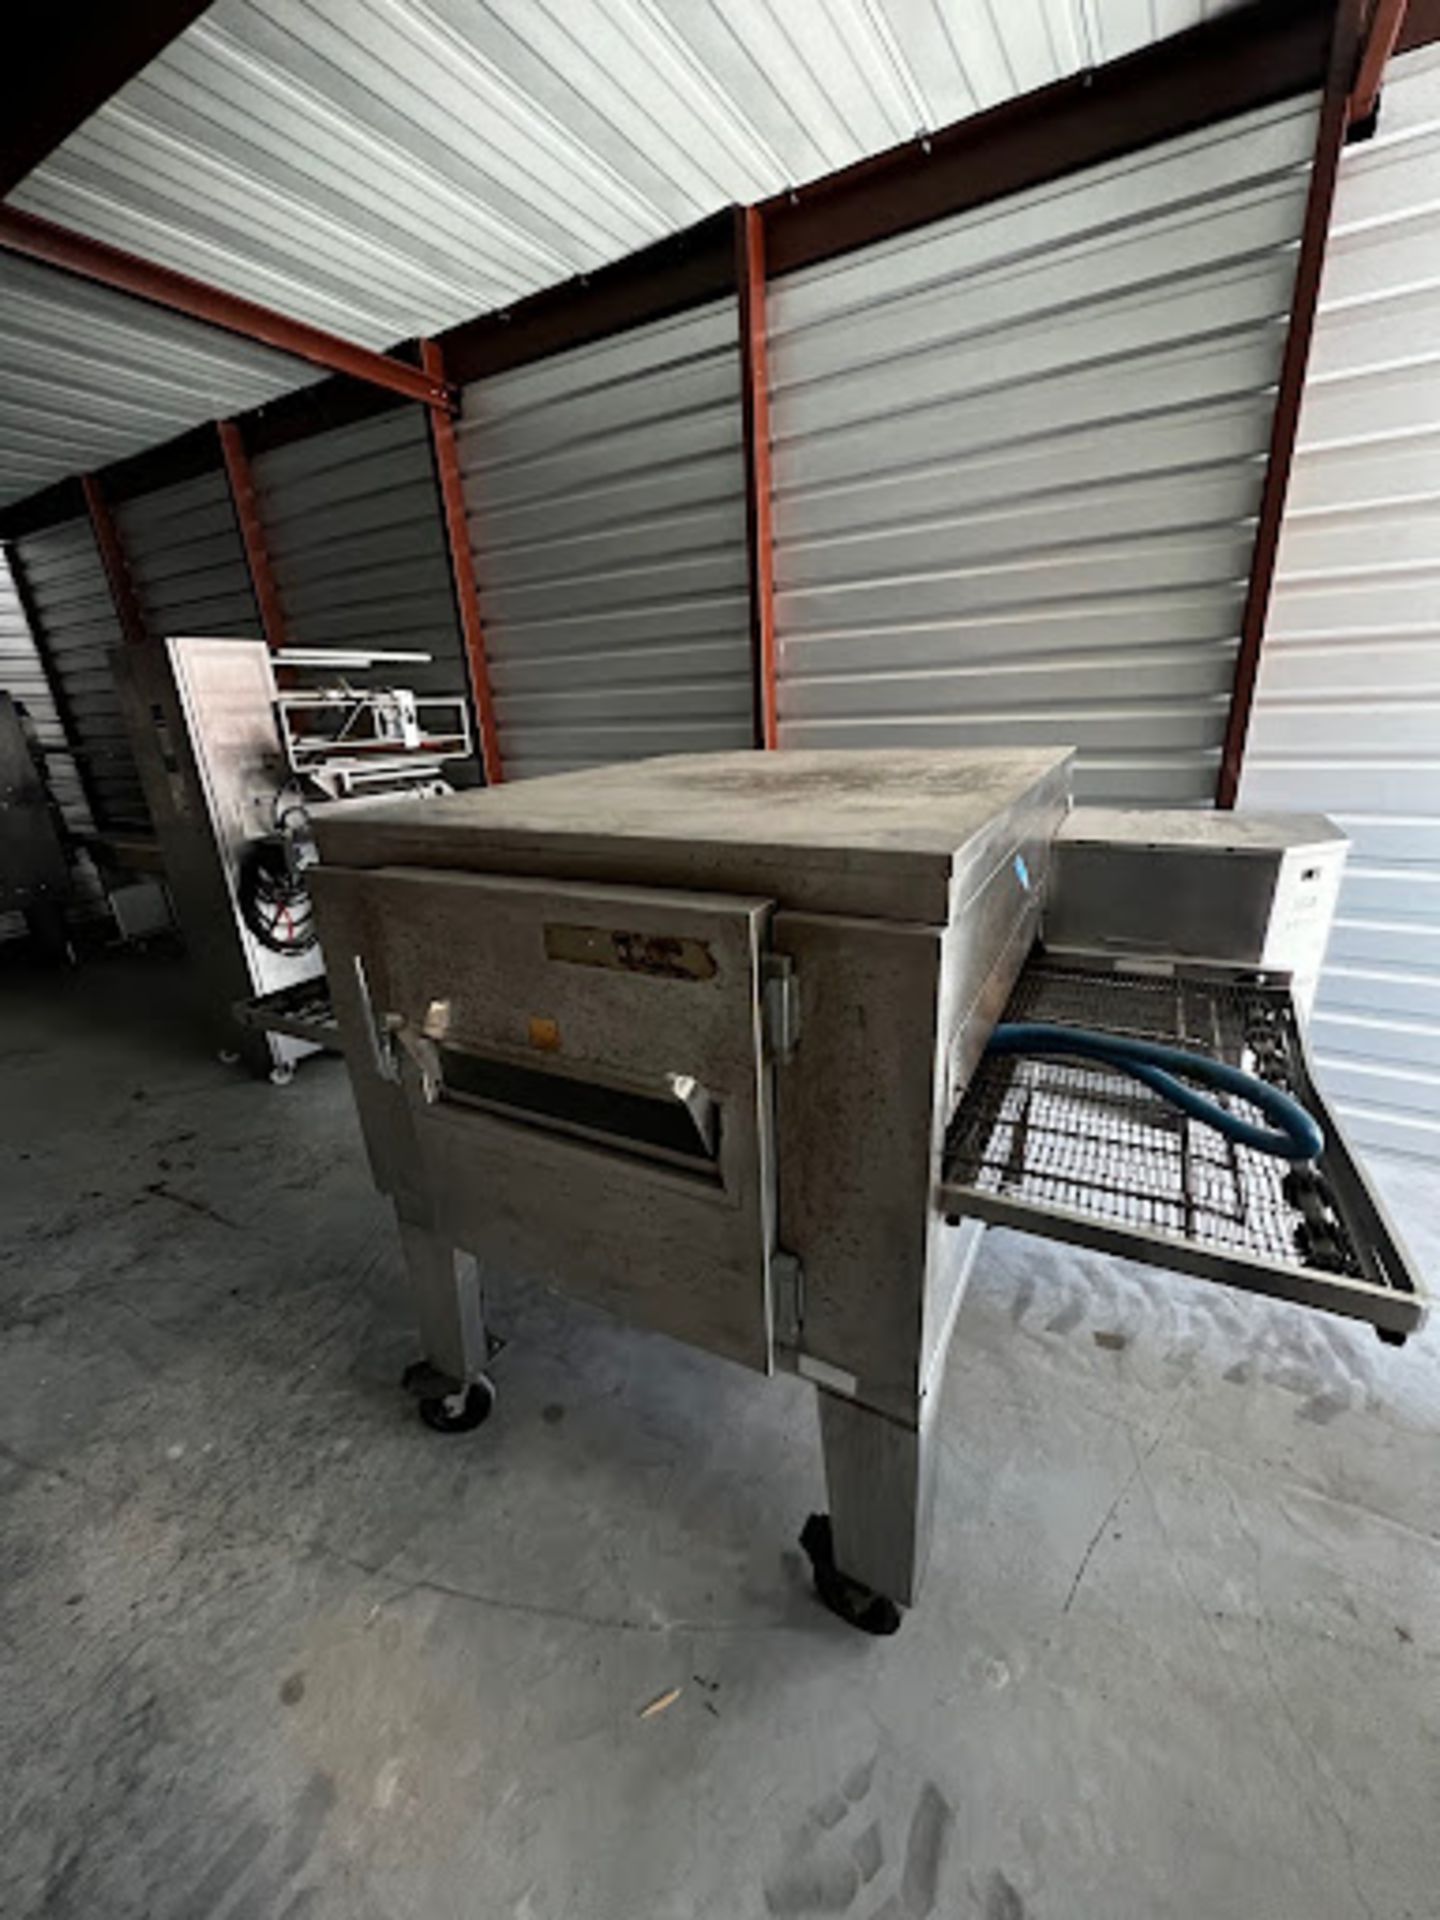 (Located in Georgetown, TX) Lincoln Impinger oven, Model# 1450, Serial# 33997 205